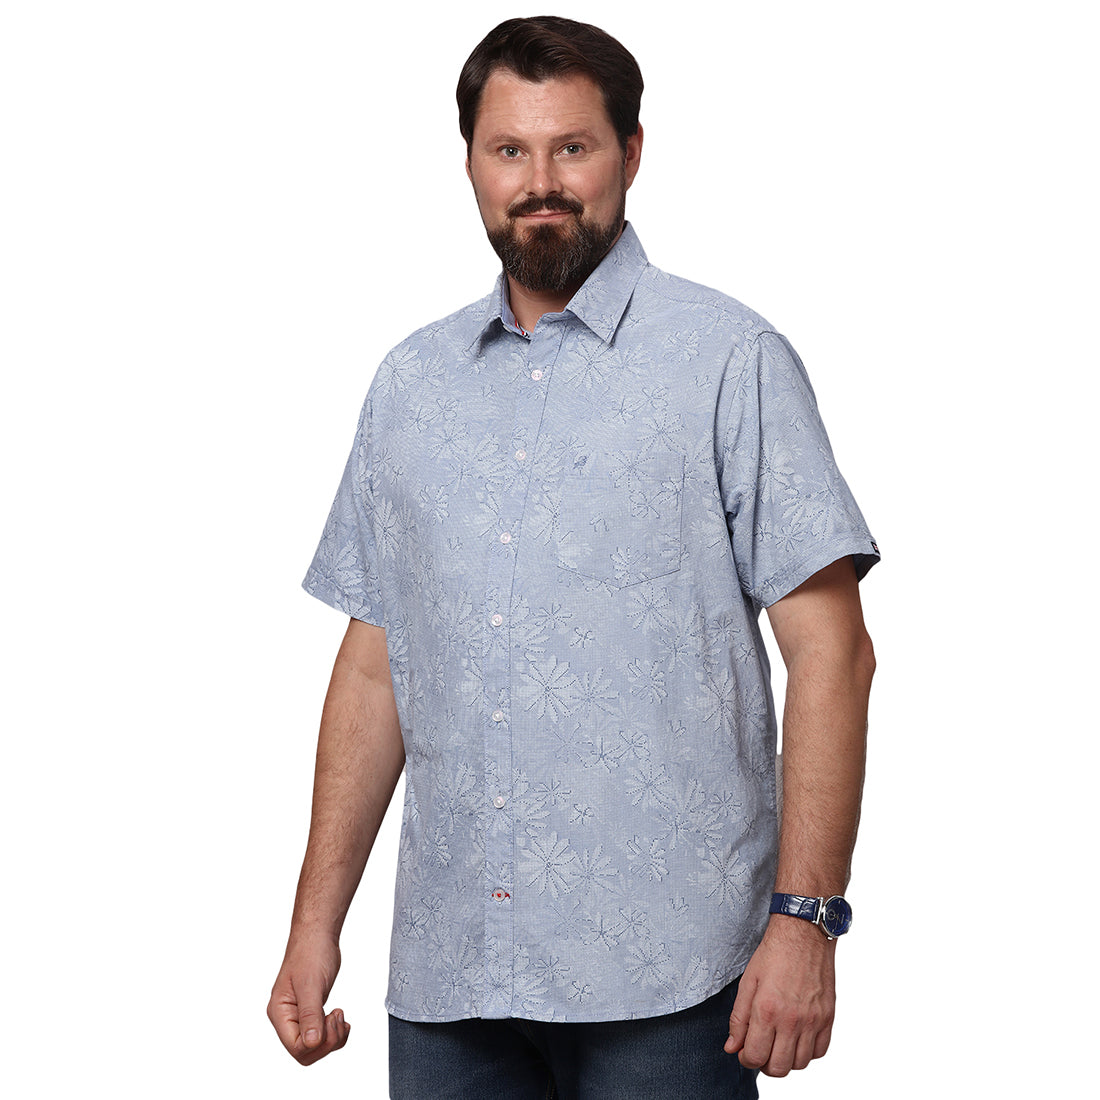 Big & Bold Print Blue Half Sleeves Slim Fit Casual Shirts (Plus Size) - Double Two